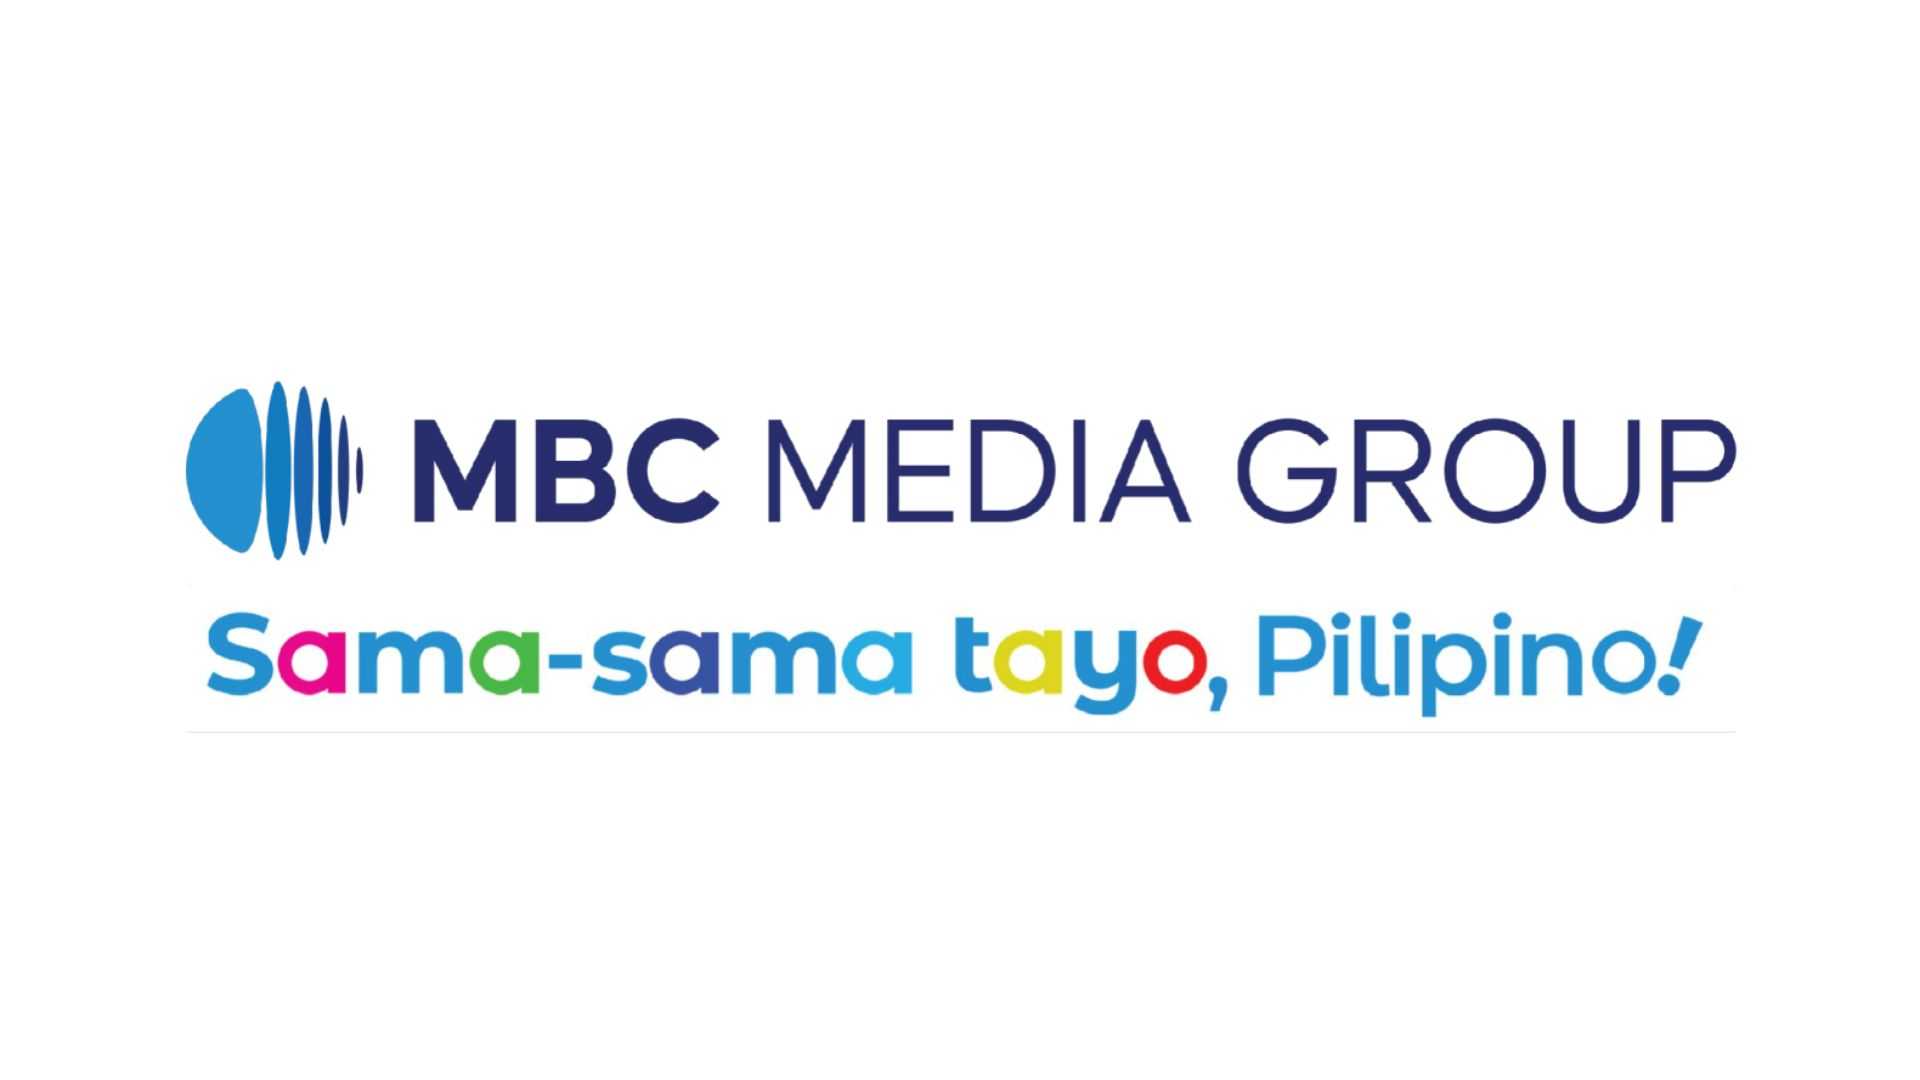 MBC Media Group envisions bolder, compelling content creation